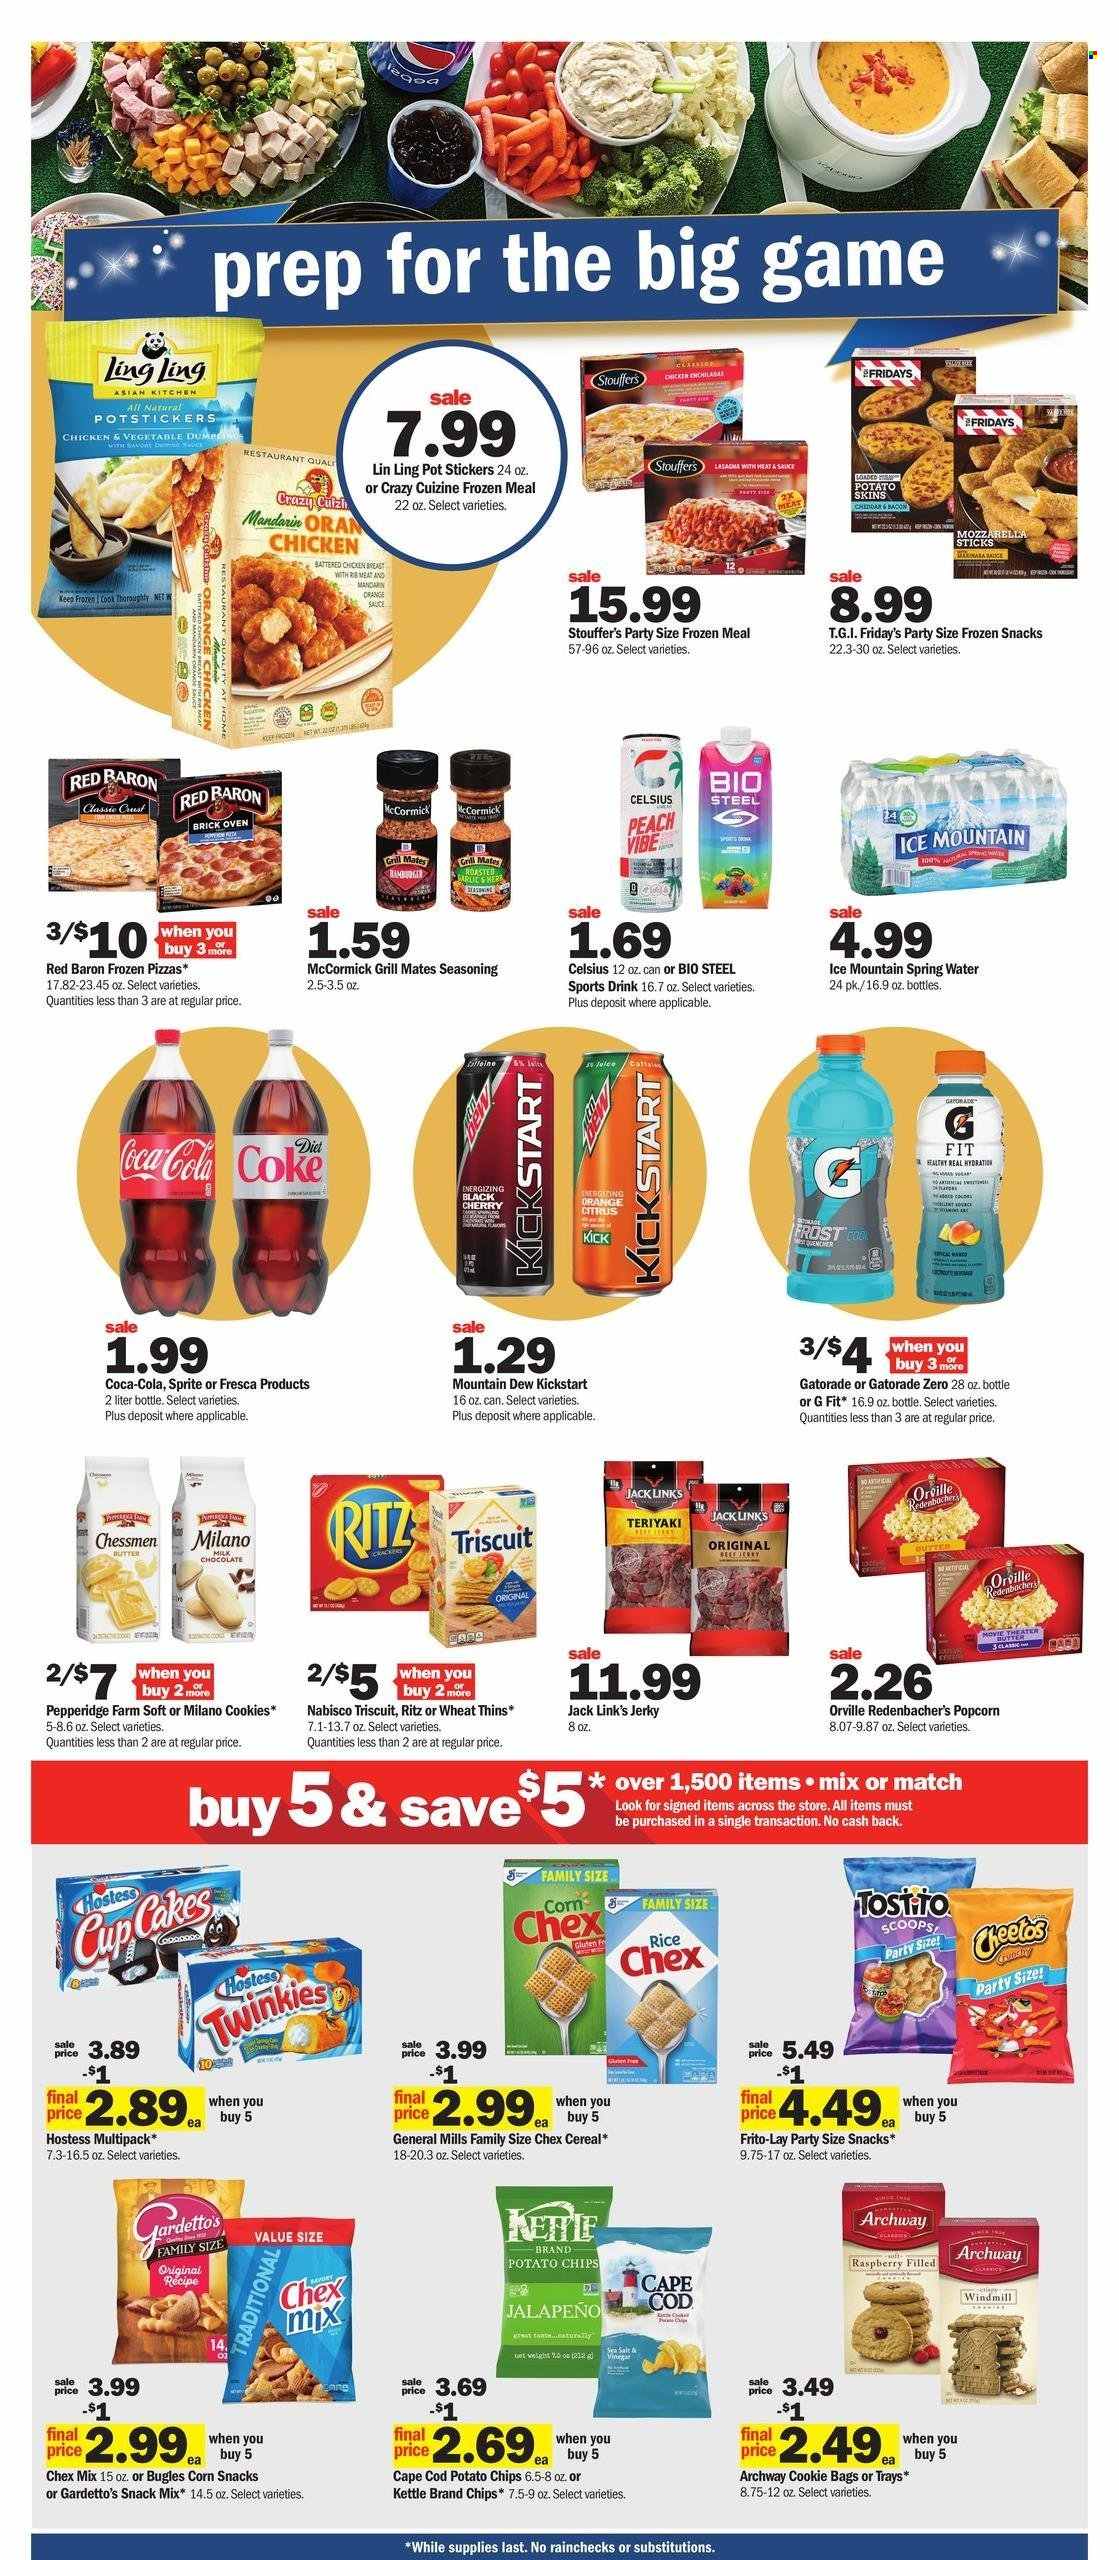 thumbnail - Meijer Flyer - 02/05/2023 - 02/11/2023 - Sales products - jalapeño, mandarines, cherries, oranges, cod, pizza, lasagna meal, bacon, jerky, mozzarella, cheese, Stouffer's, Red Baron, cookies, chocolate, snack, RITZ, potato chips, Cheetos, Thins, popcorn, Frito-Lay, Jack Link's, Chex Mix, cereals, rice, spice, Coca-Cola, Mountain Dew, Sprite, Gatorade, spring water, Ice Mountain, Crest, bag, pot, sticker, oven, grill. Page 5.